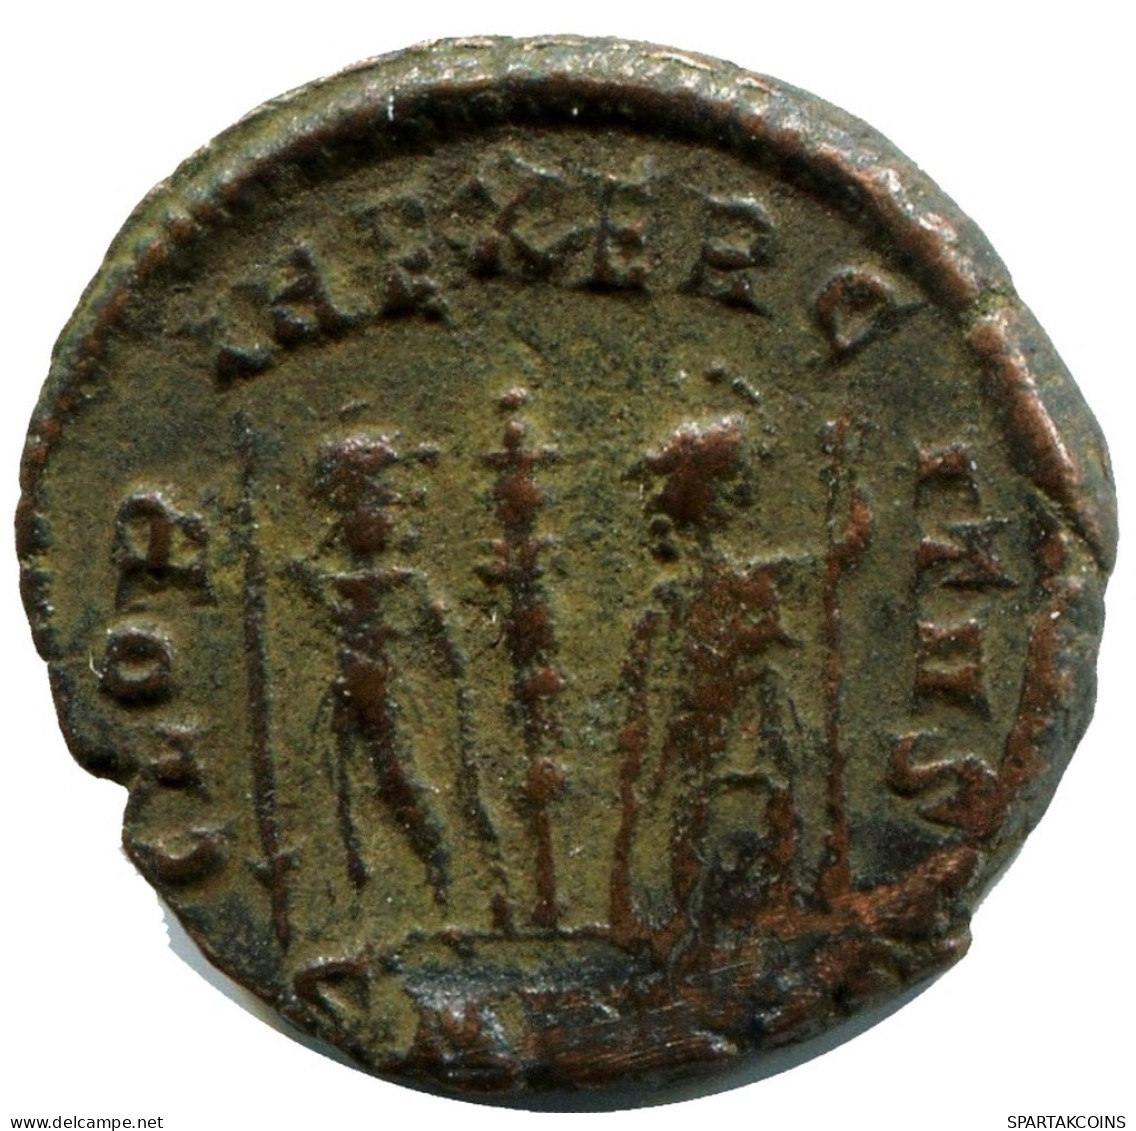 CONSTANS MINTED IN ANTIOCH FOUND IN IHNASYAH HOARD EGYPT #ANC11796.14.U.A - The Christian Empire (307 AD Tot 363 AD)